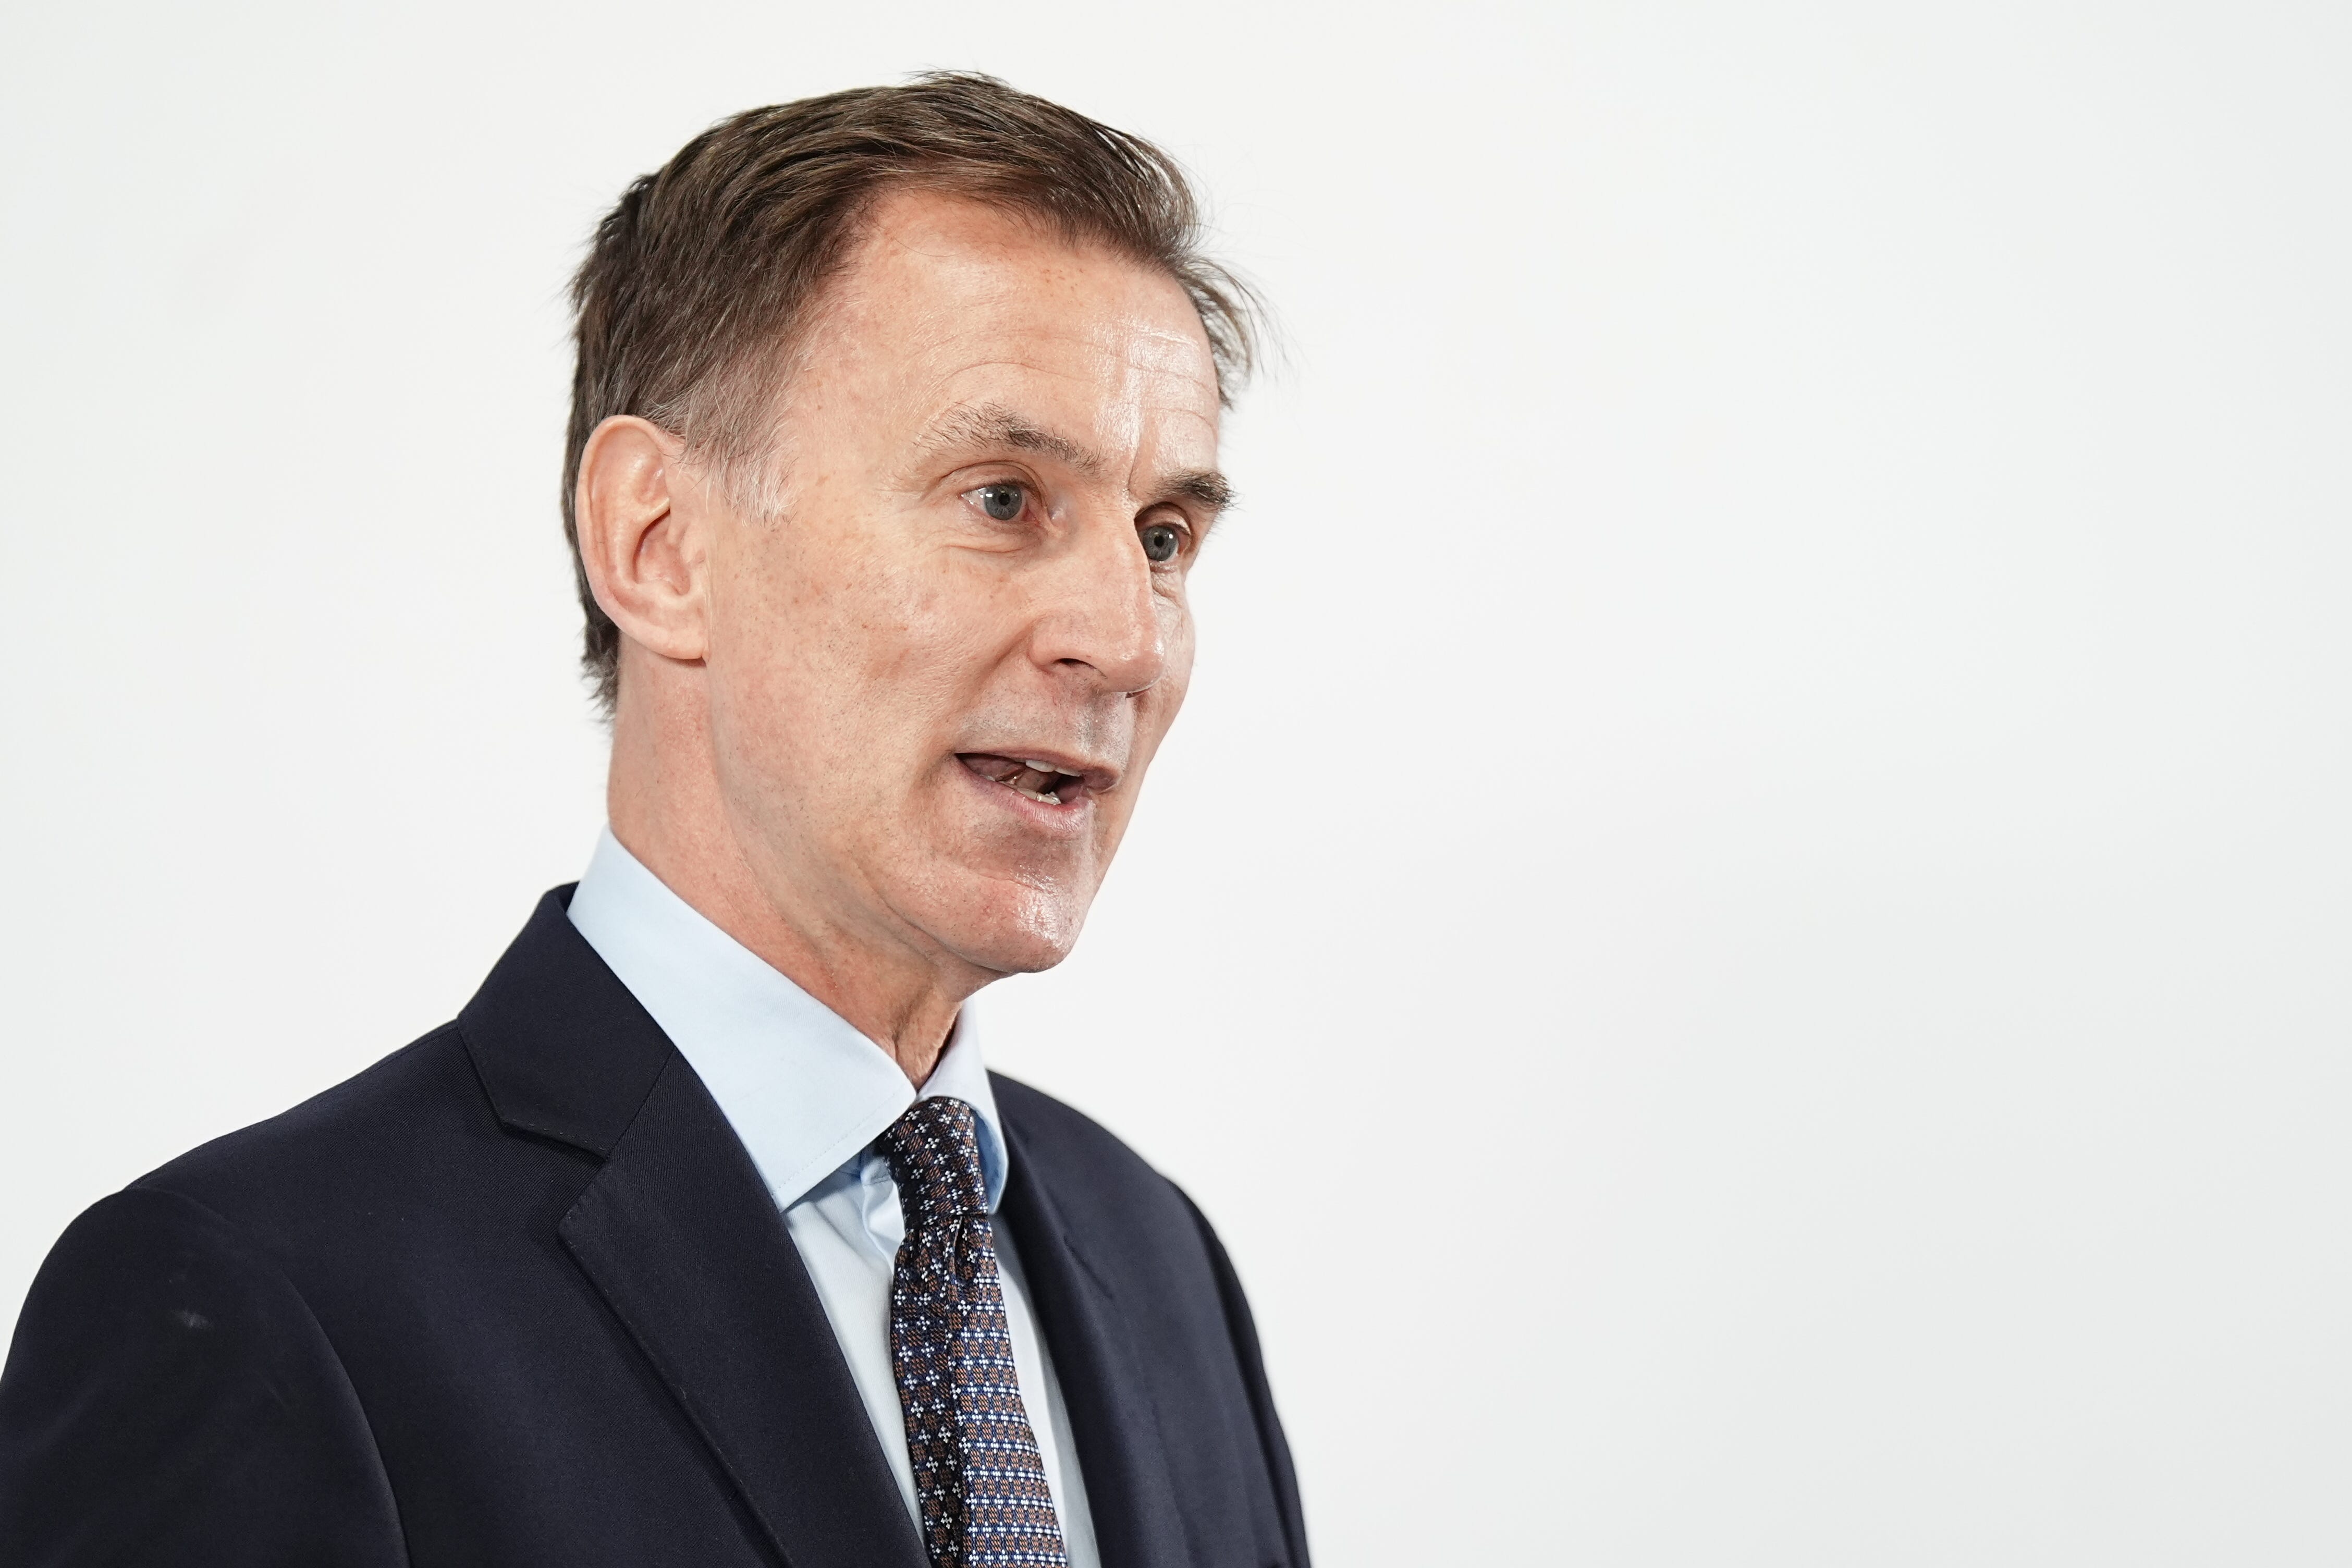 Chancellor Jeremy Hunt is facing a battle to win his seat (Aaron Chown/PA)